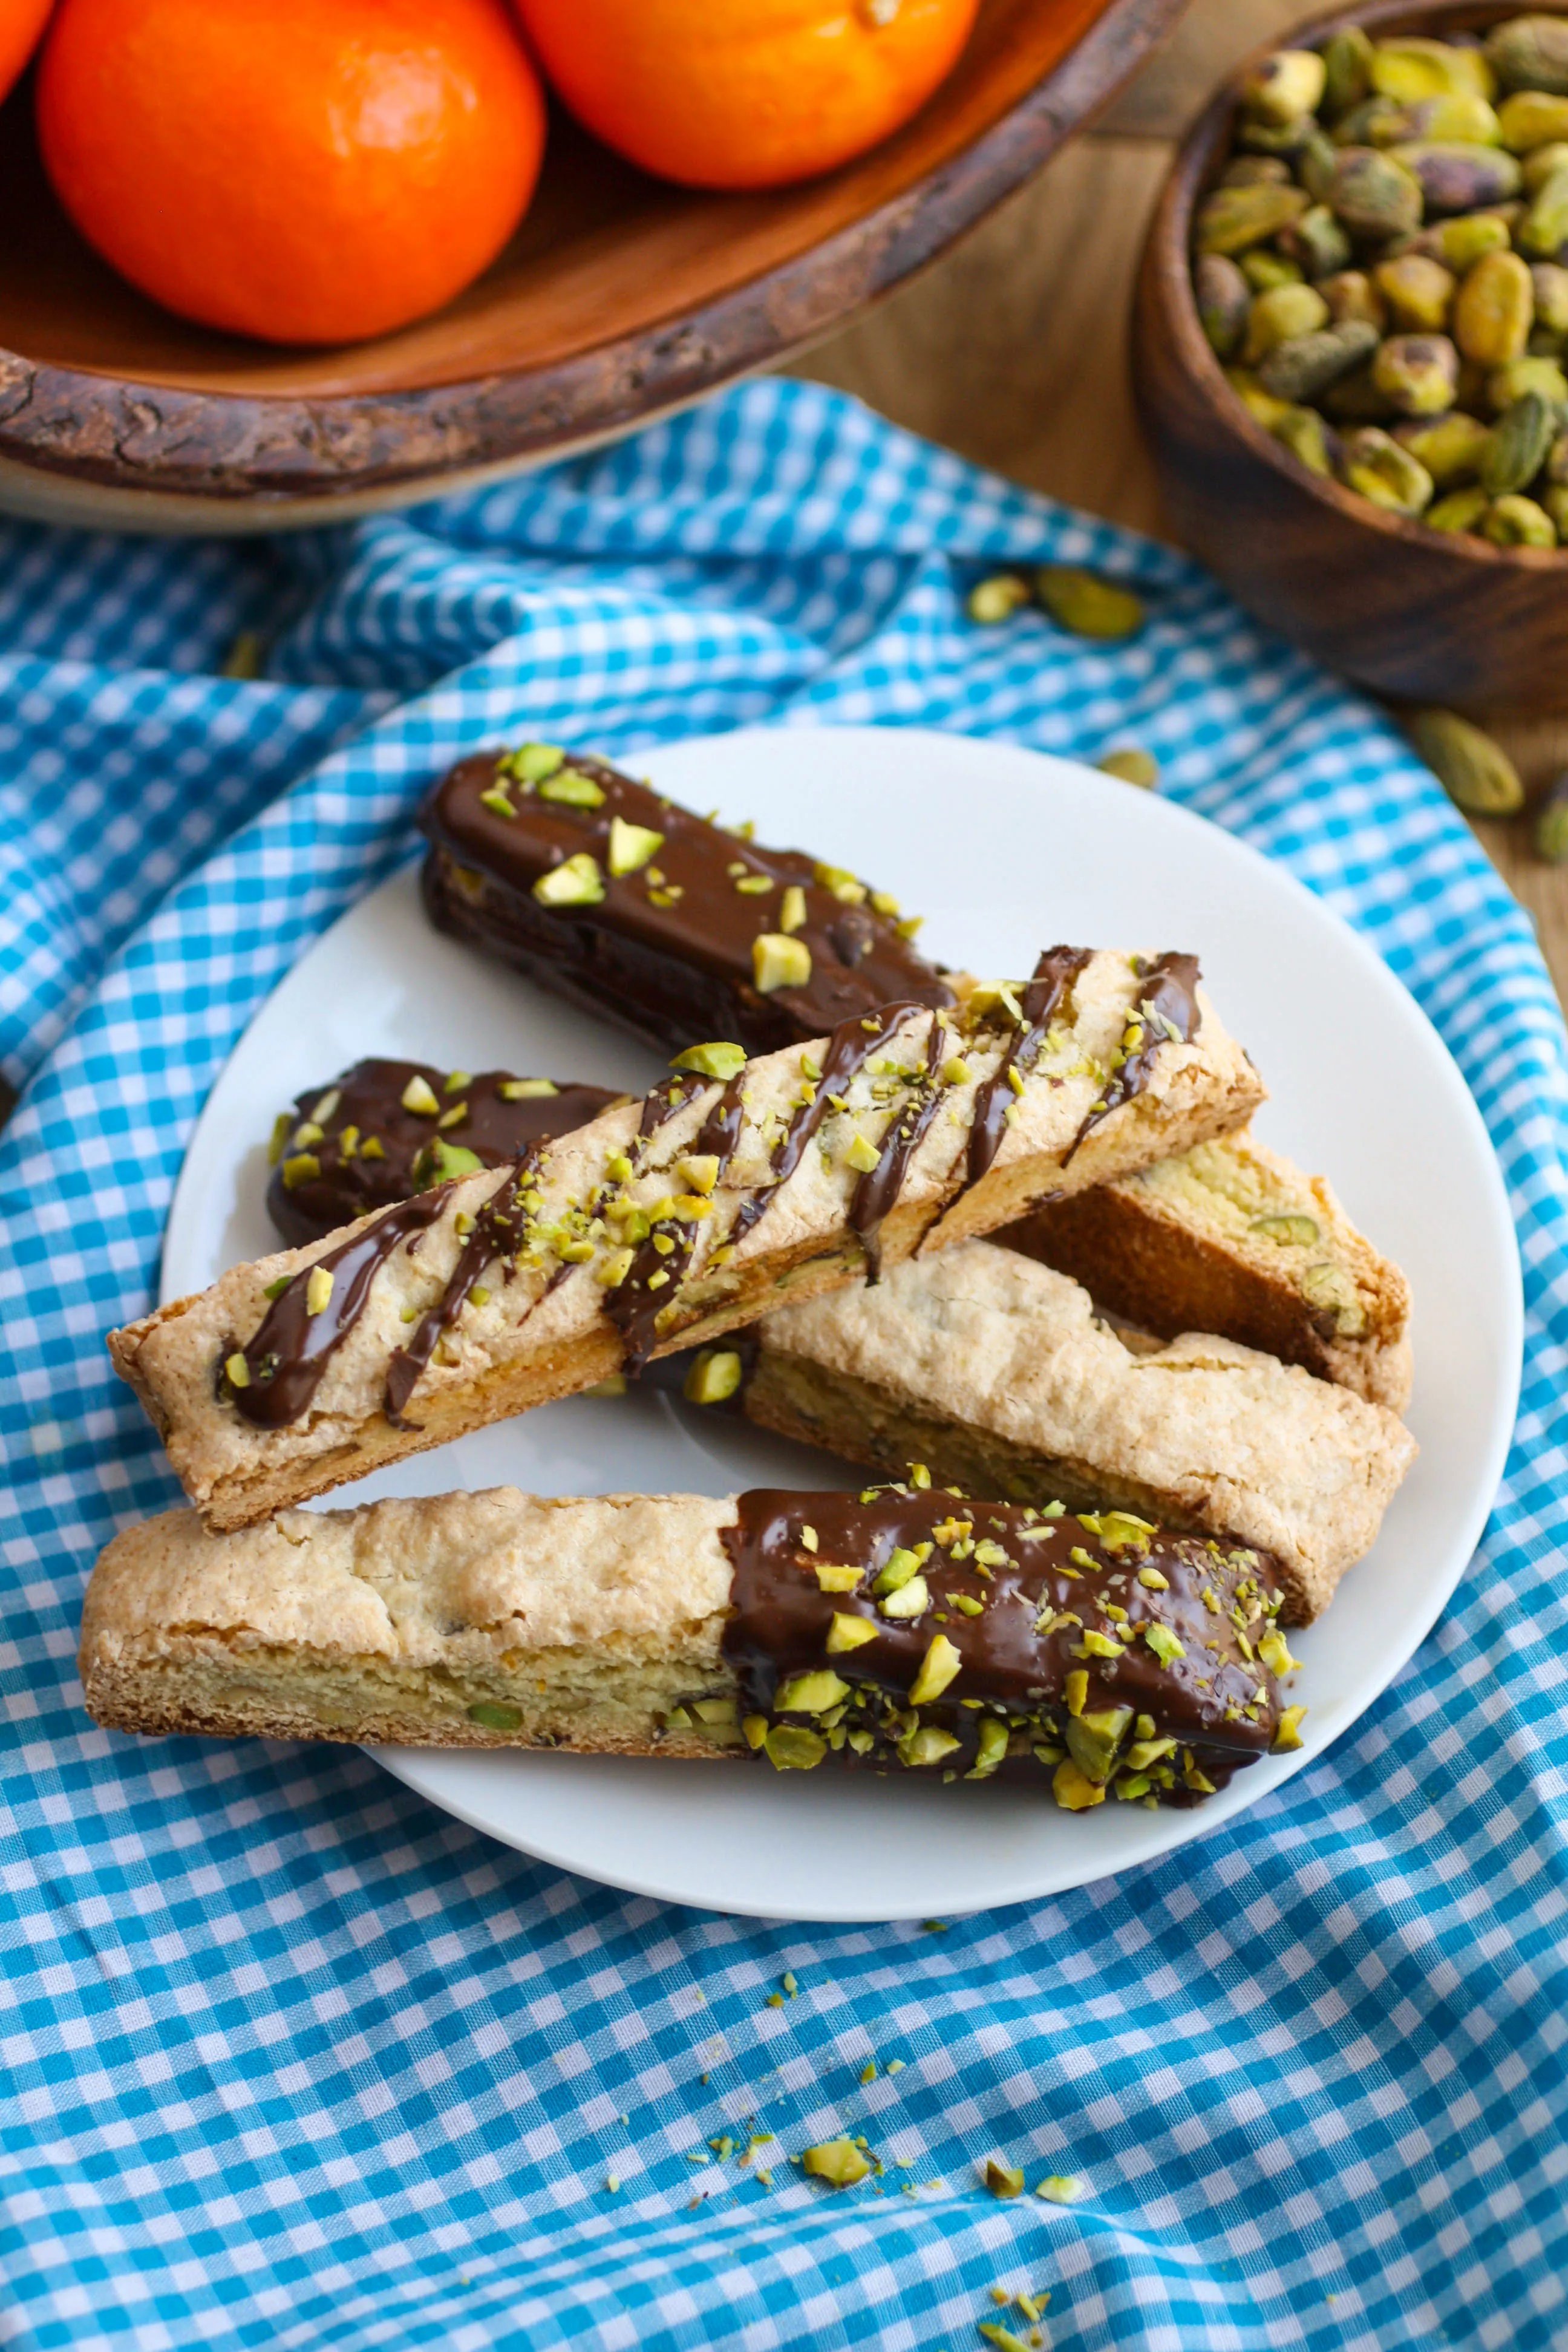 Chocolate-Espresso Dipped Orange and Pistachio Biscotti are a fabulous Italian-style cookie you'll love. These cookies are perfect with coffee or a glass of milk!